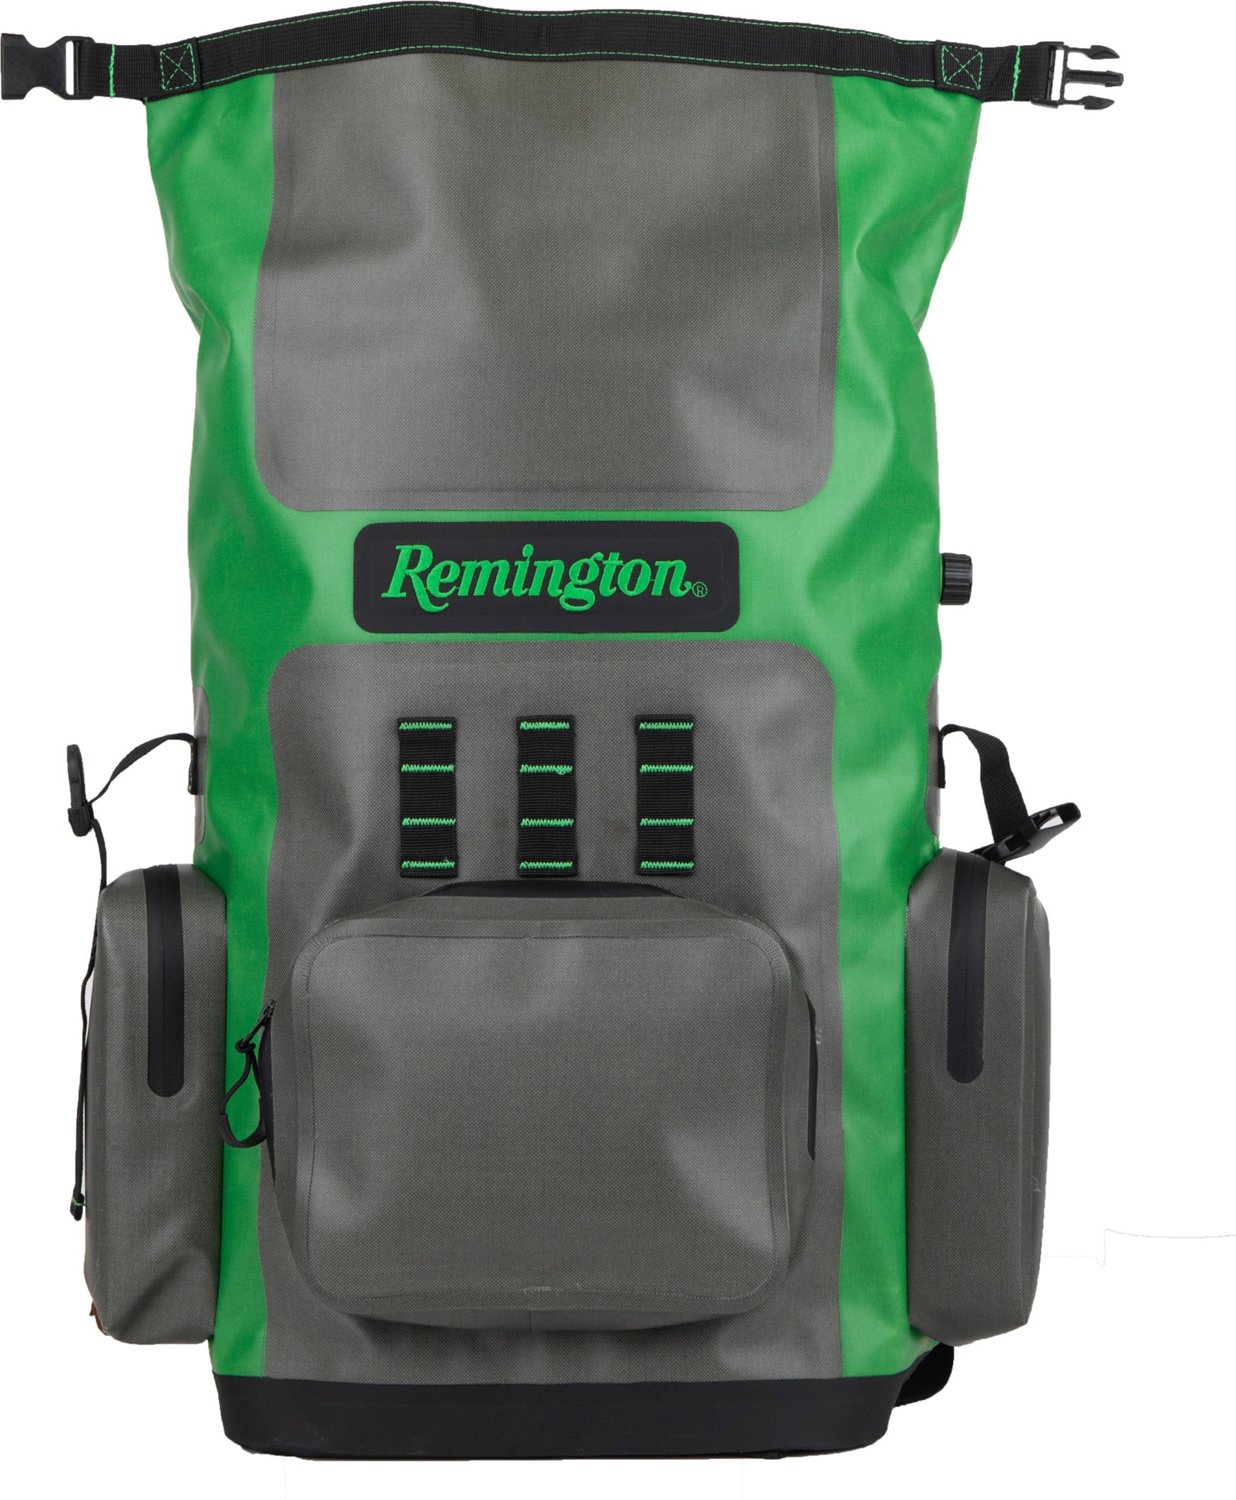 Remington 42-Can Backpack Cooler